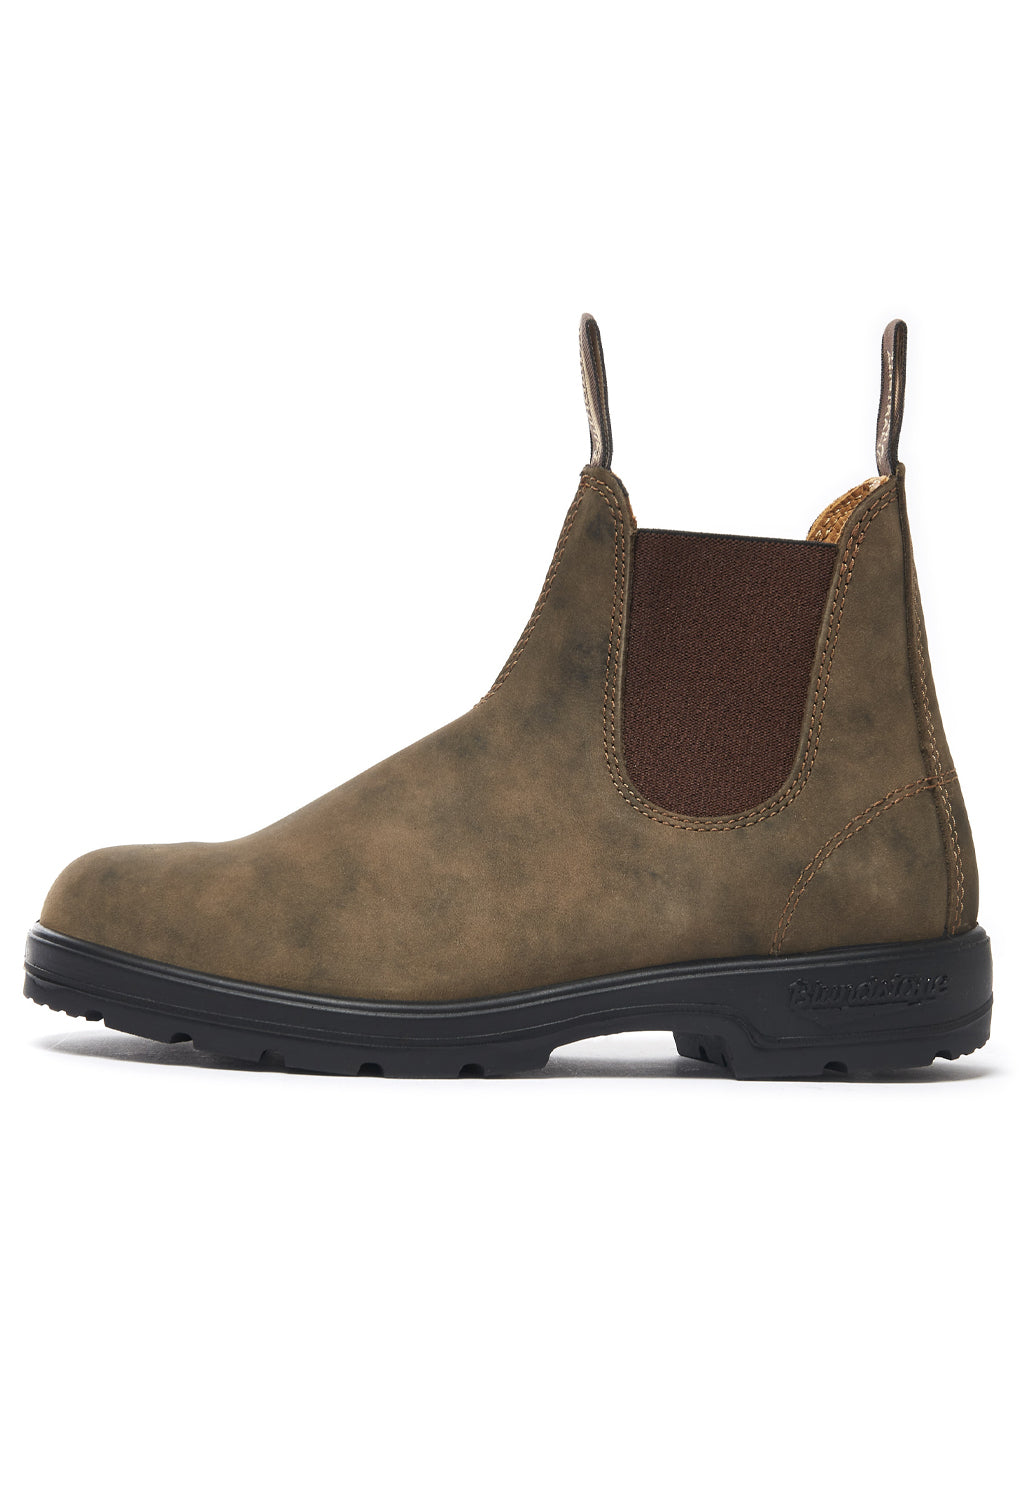 Blundstone 585 Boots 0